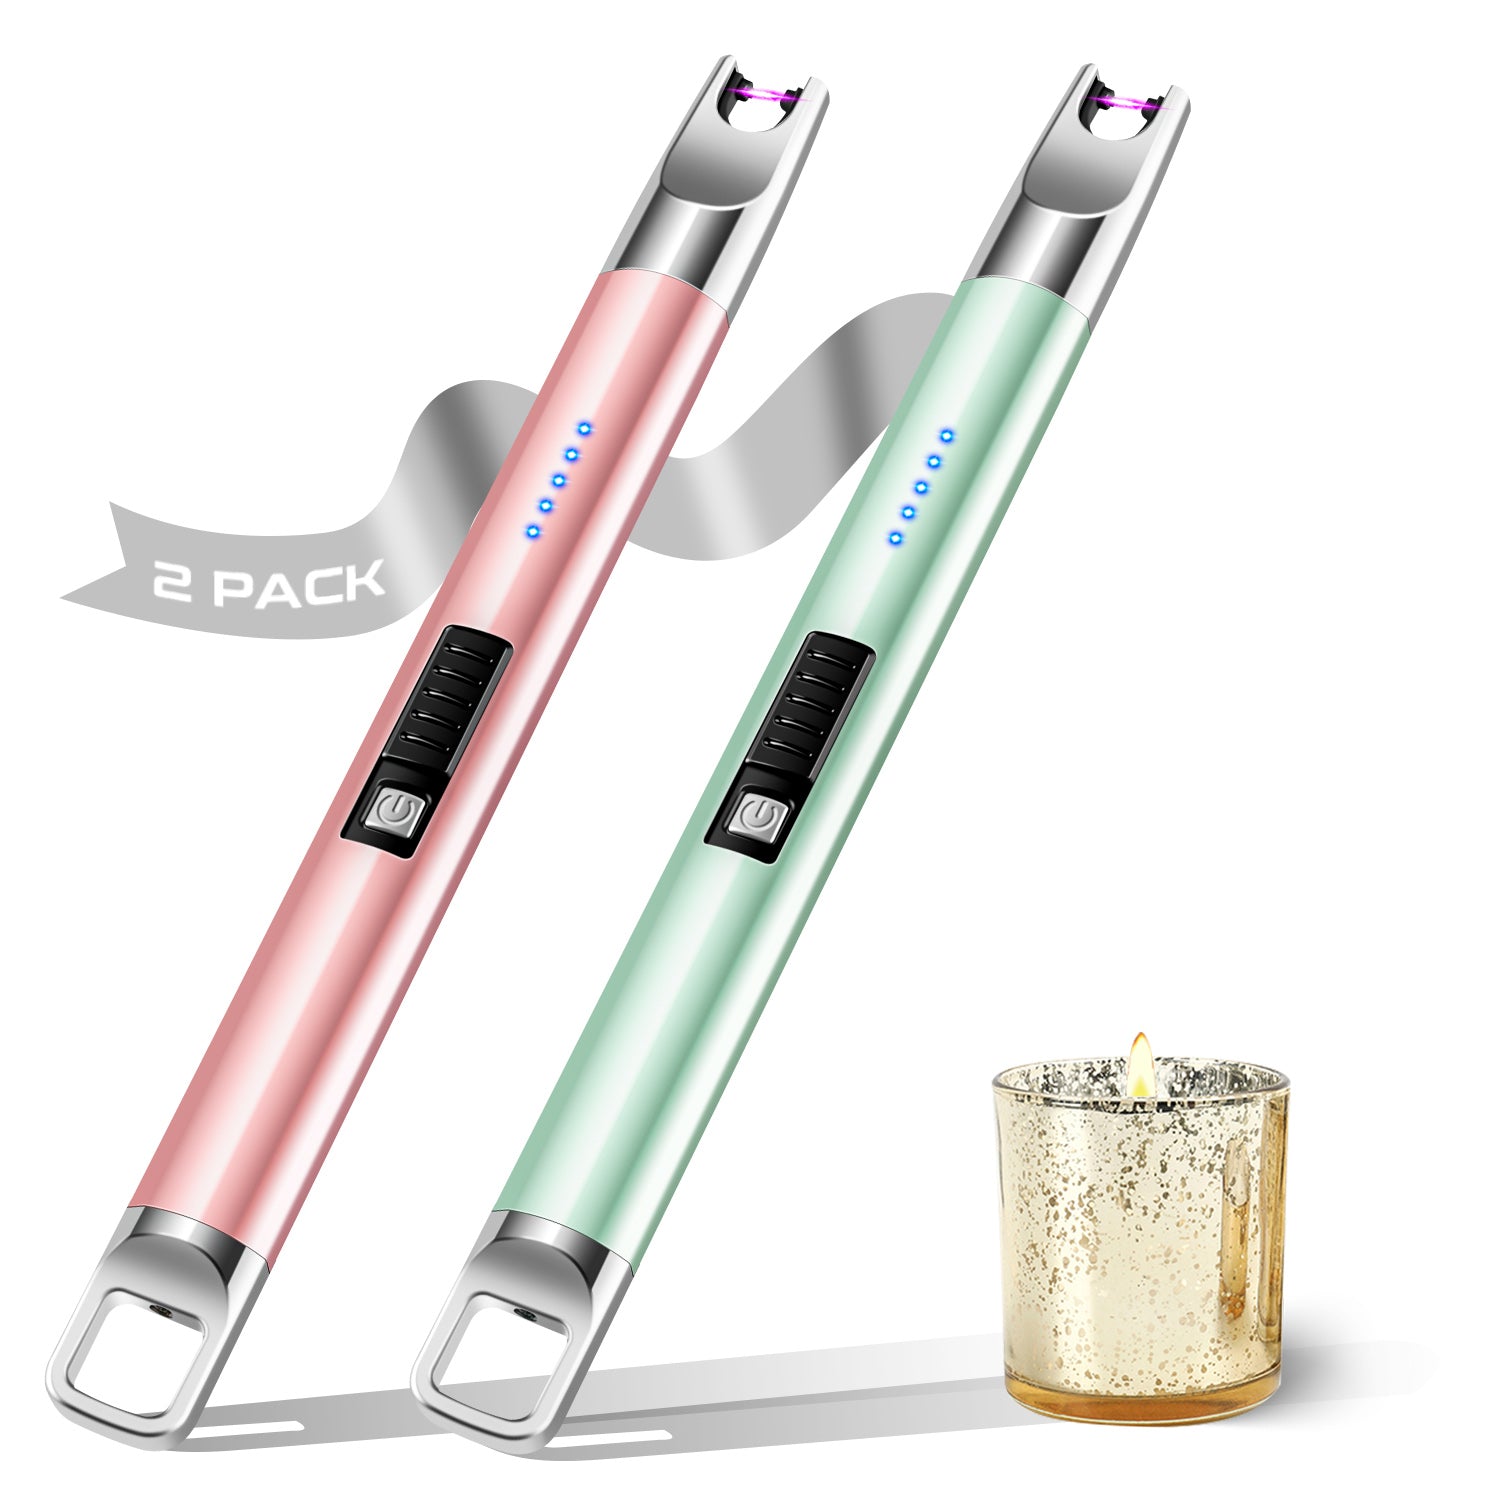 MCHERRY Electric Arc Lighters 2 Pack, USB Rechargeable Electronic